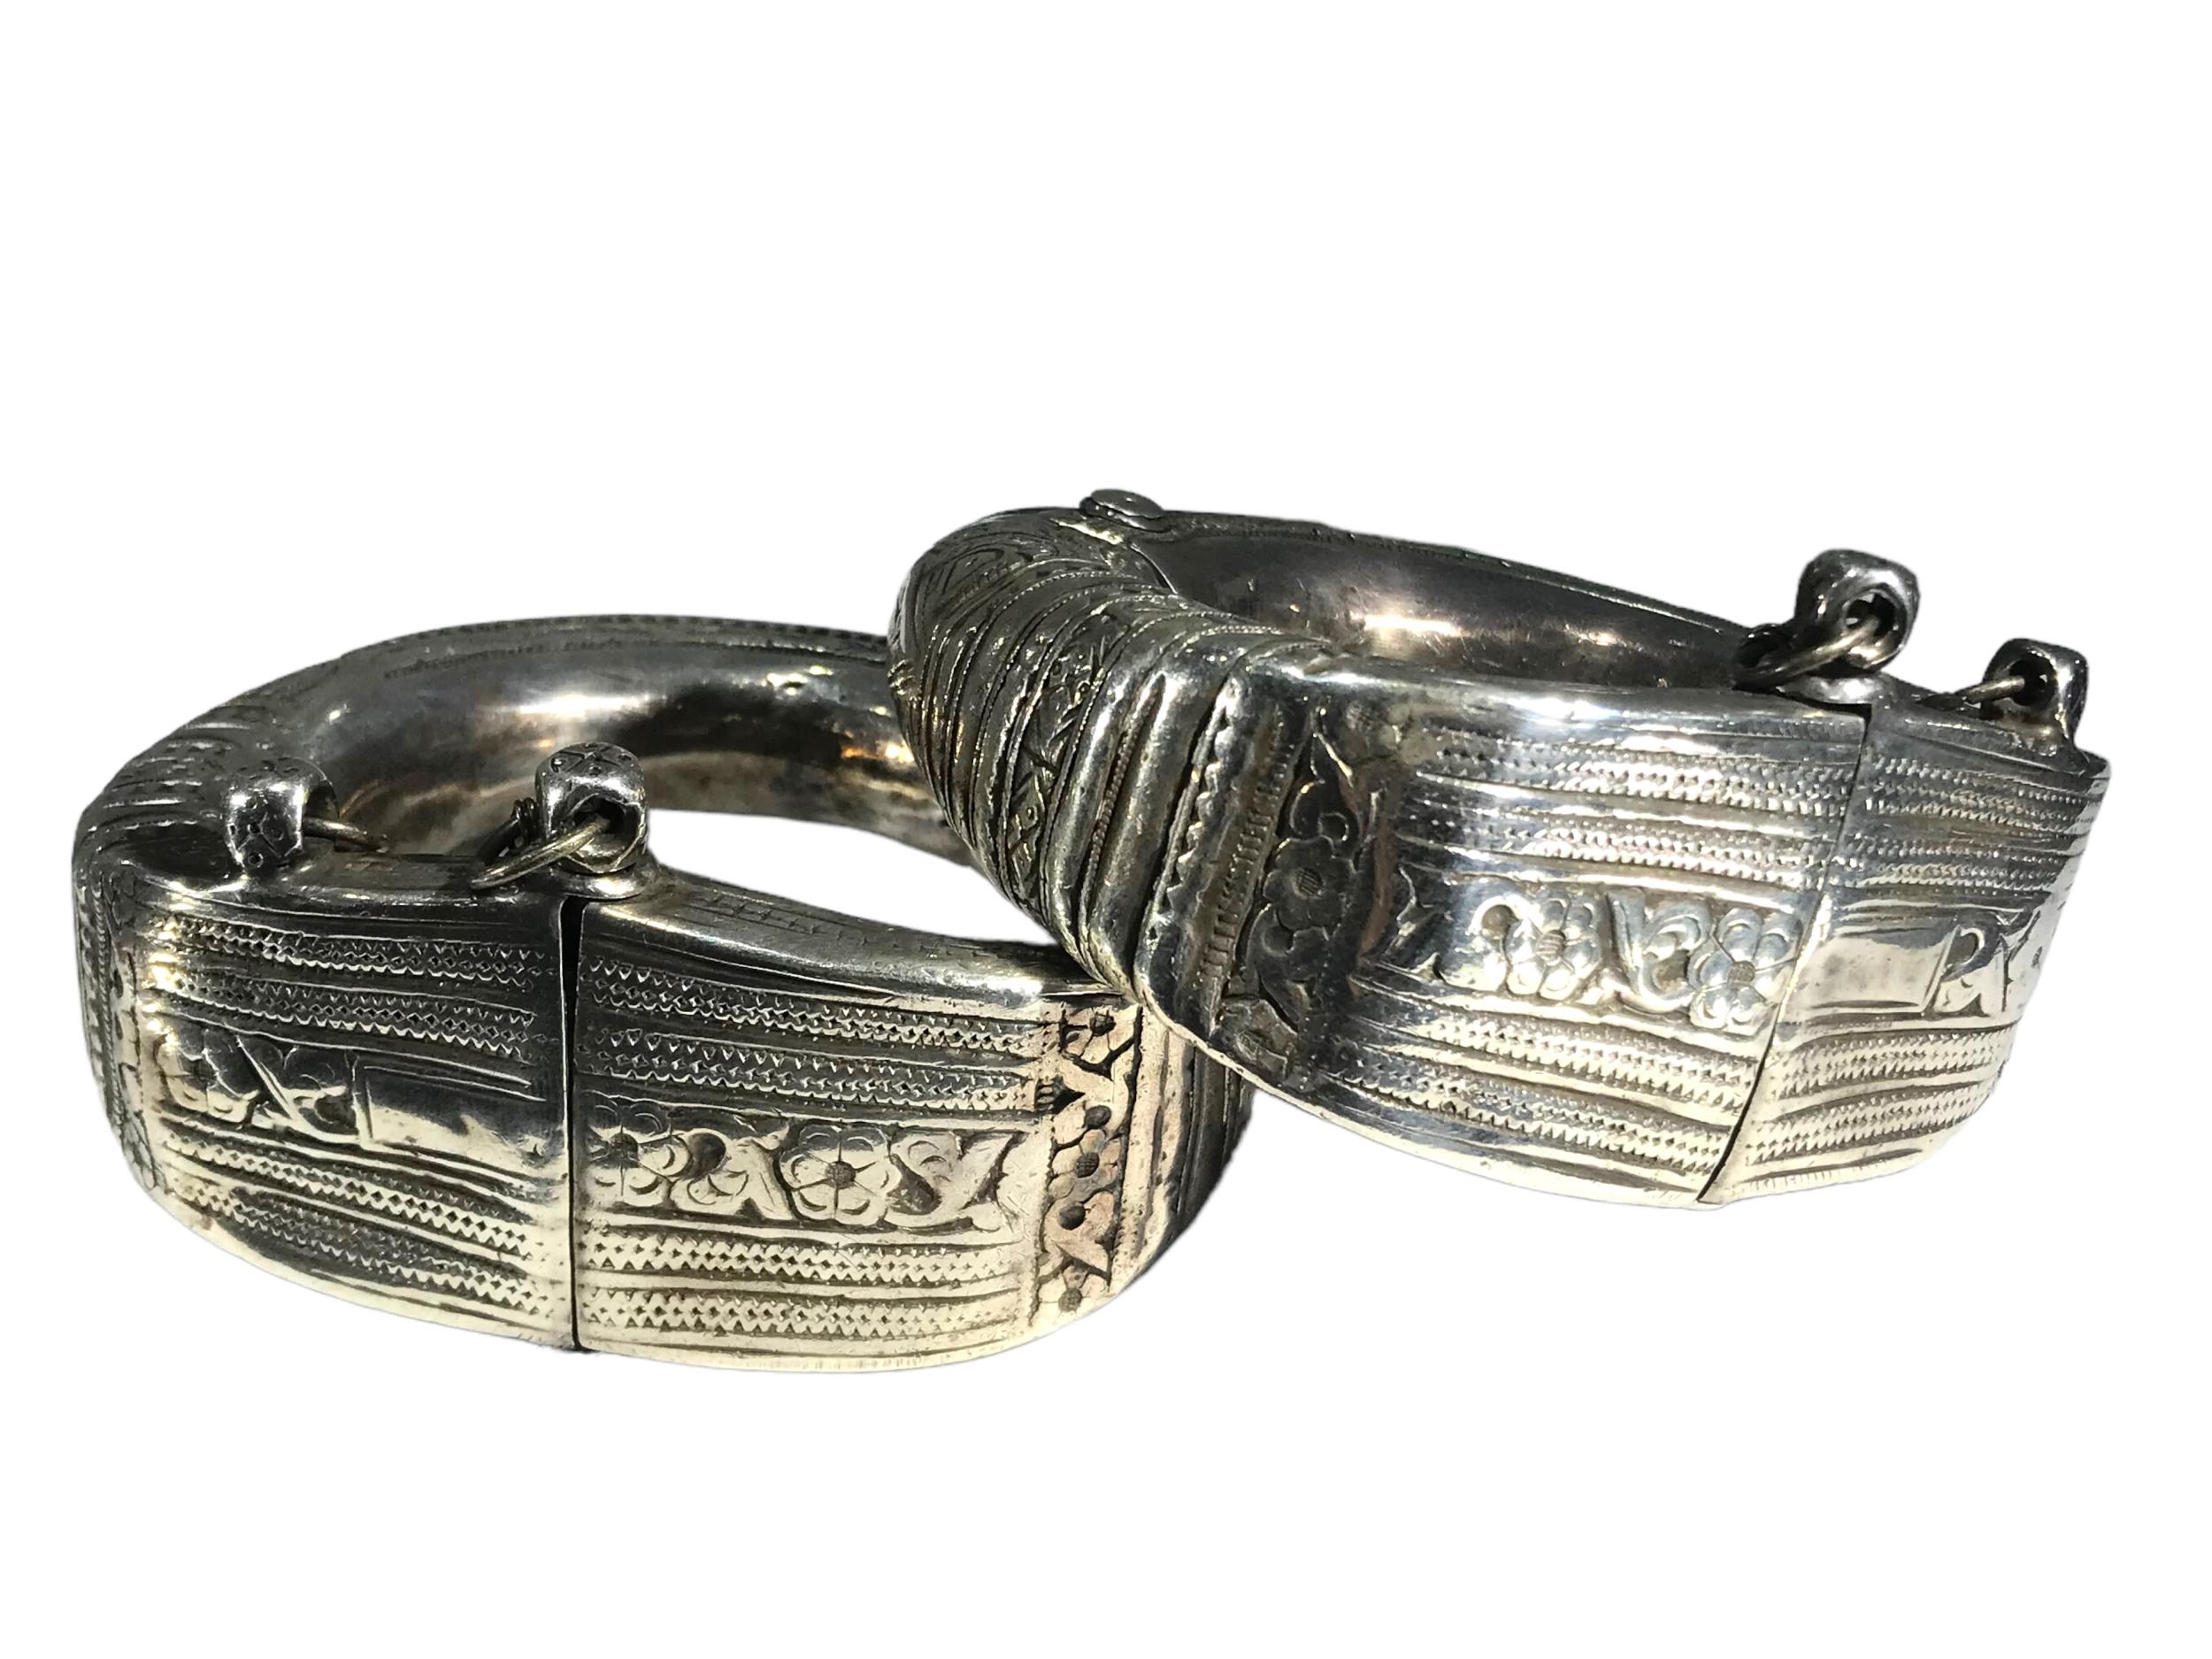 A PAIR OF LATE 19TH/EARLY 20TH CENTURY OMANI SILVER ANKLETS (PROBABLY FROM SUR, OMAN) Decorated with - Image 2 of 4